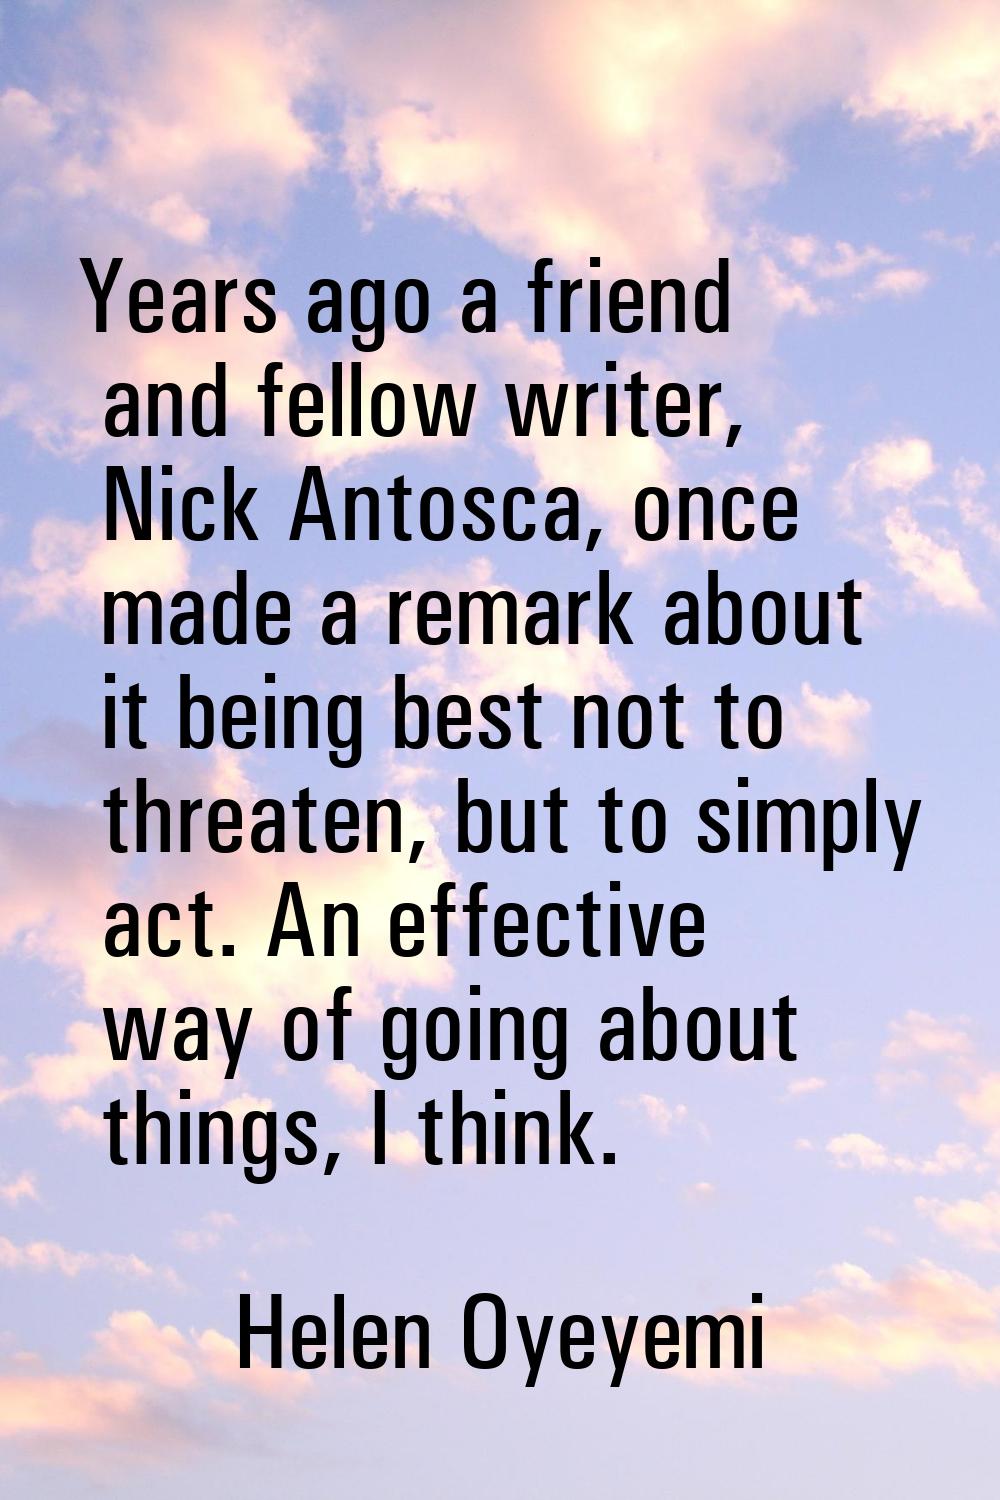 Years ago a friend and fellow writer, Nick Antosca, once made a remark about it being best not to t